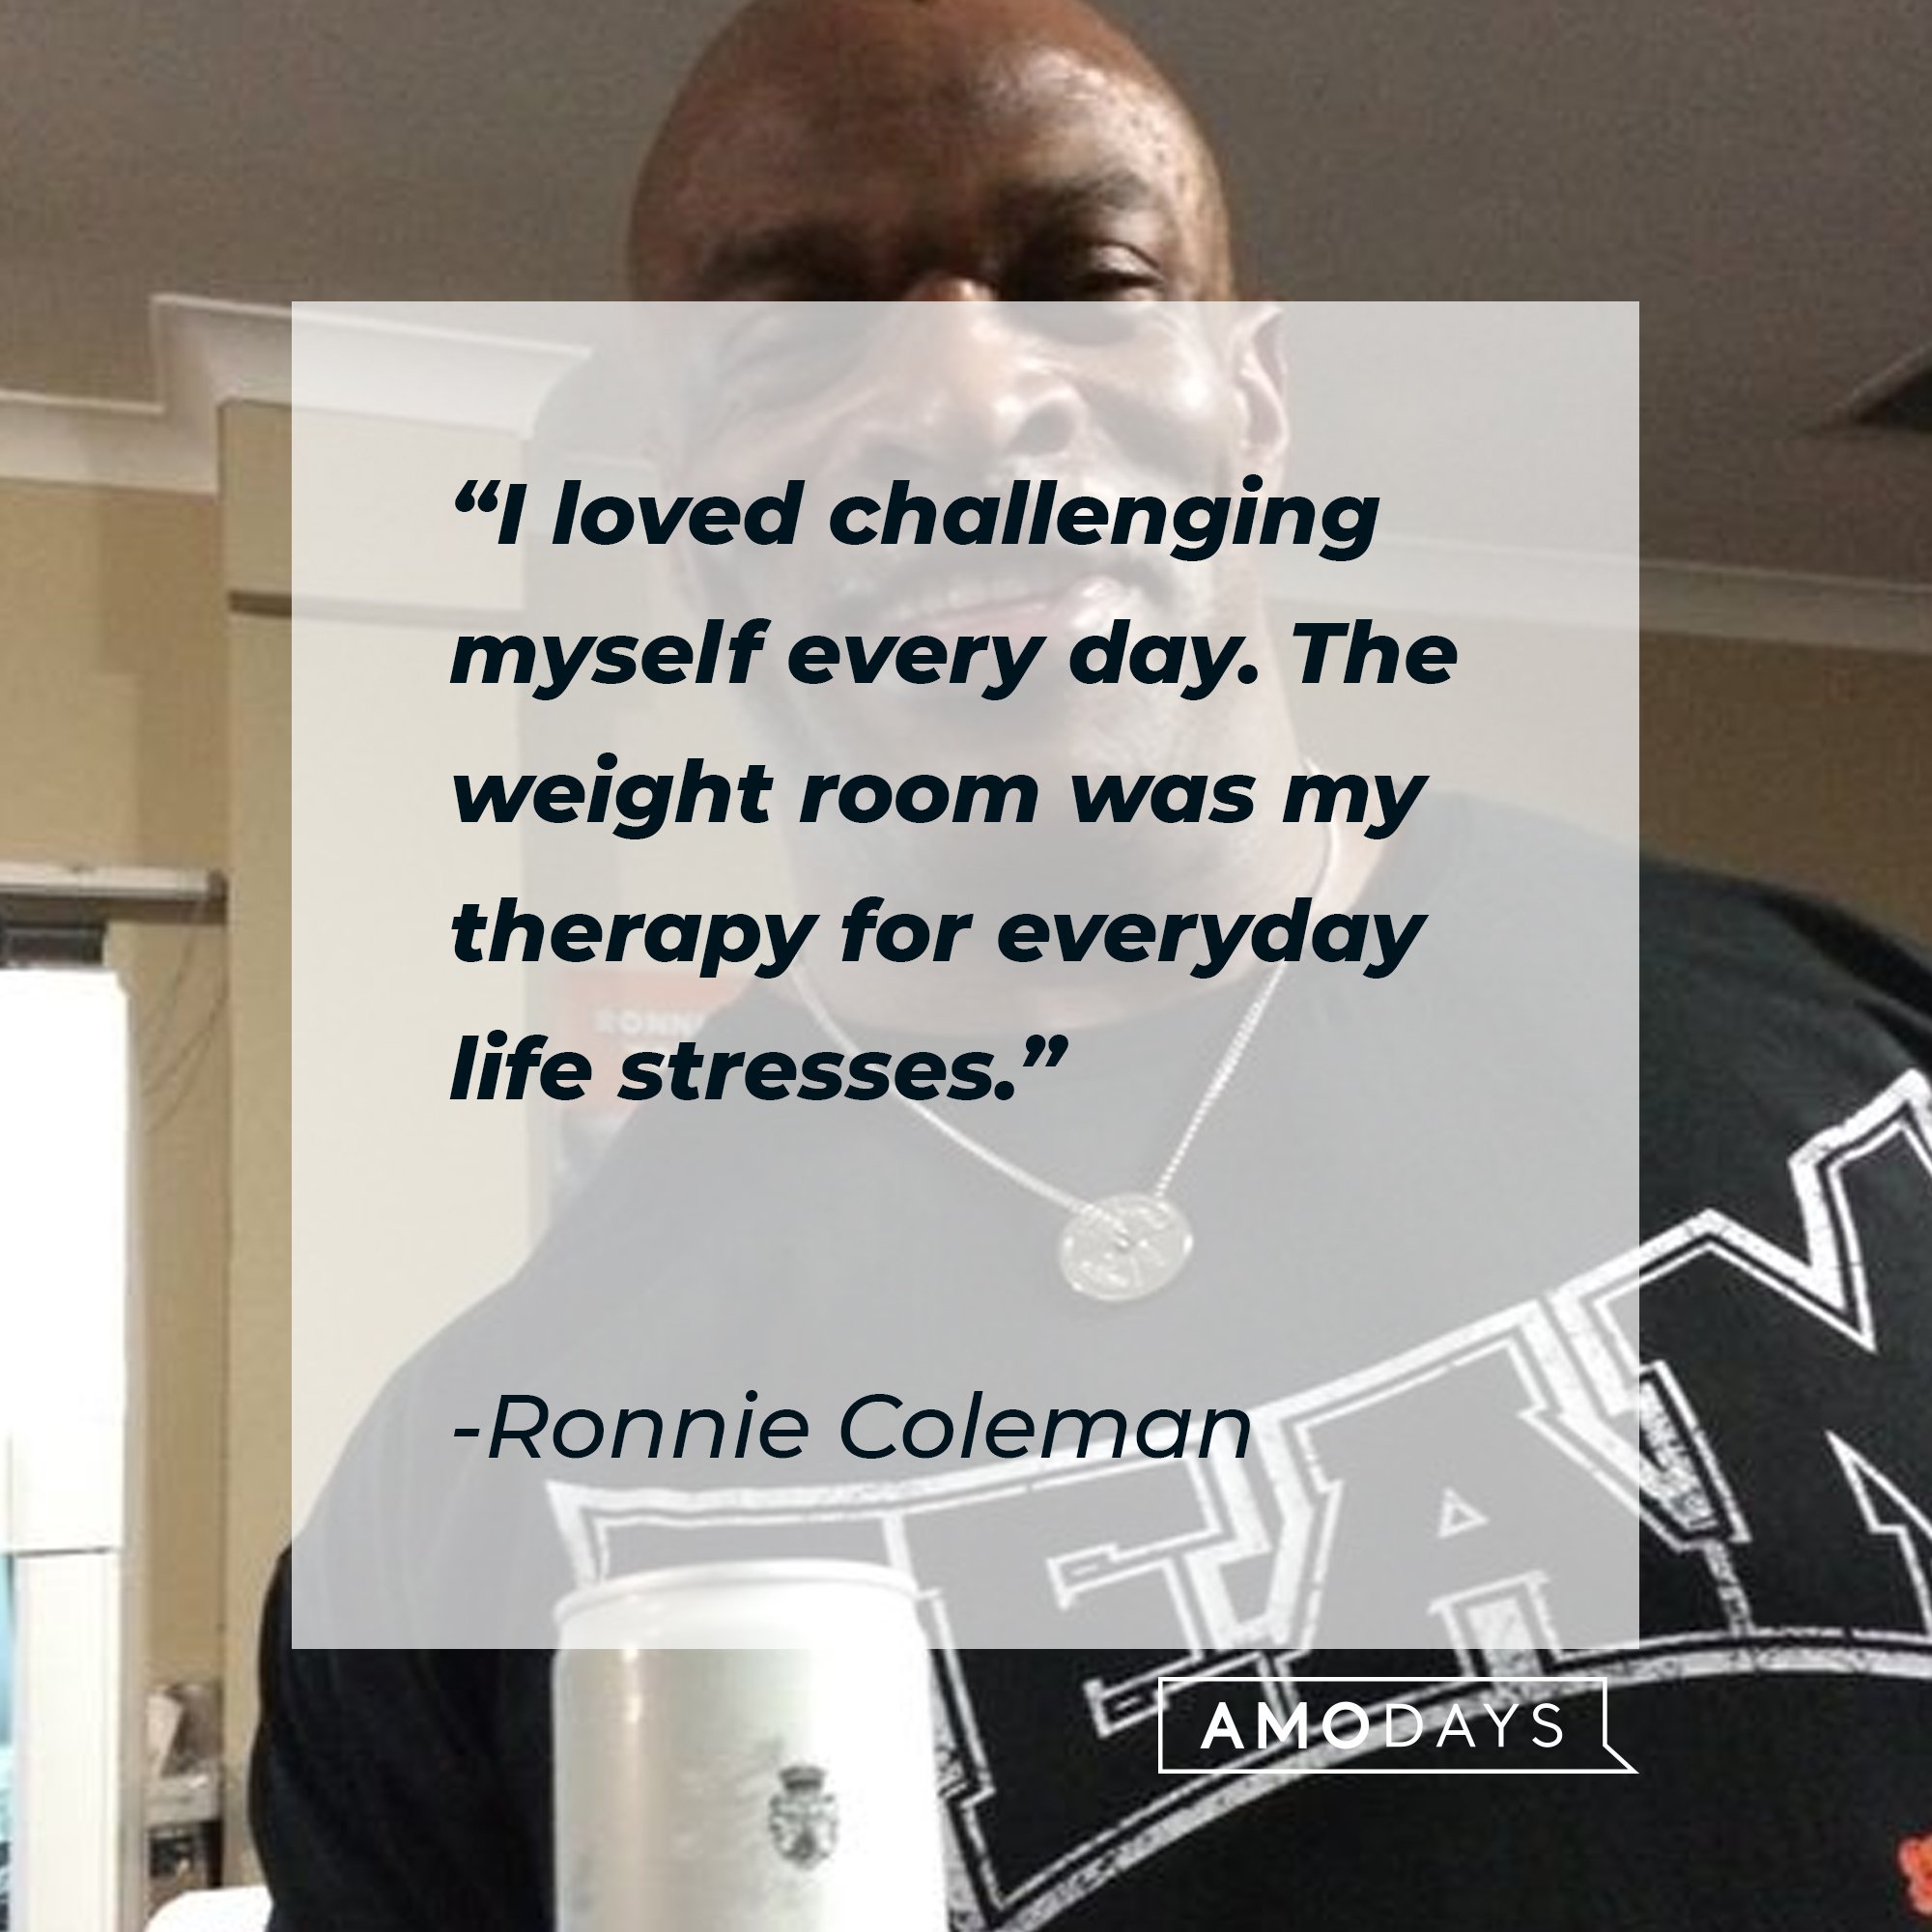  Ronnie Coleman’s quote: “I loved challenging myself every day. The weight room was my therapy for everyday life stresses.” | Image: AmoDays